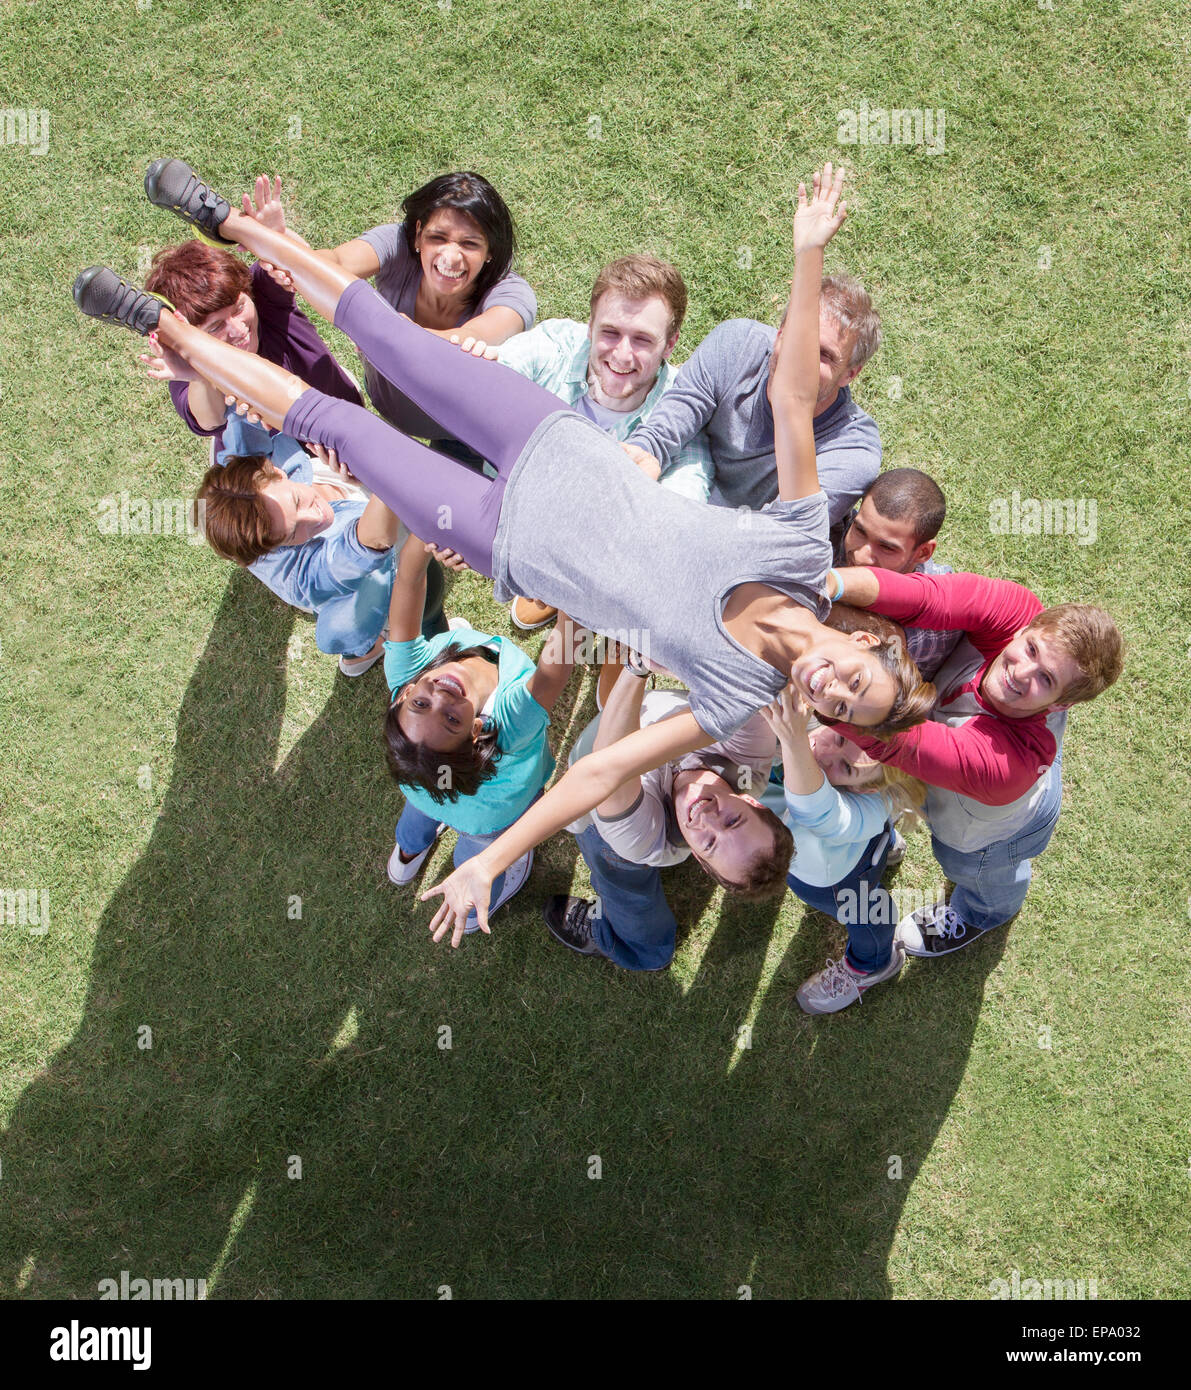 carefree woman crowdsurfing supporting team Stock Photo